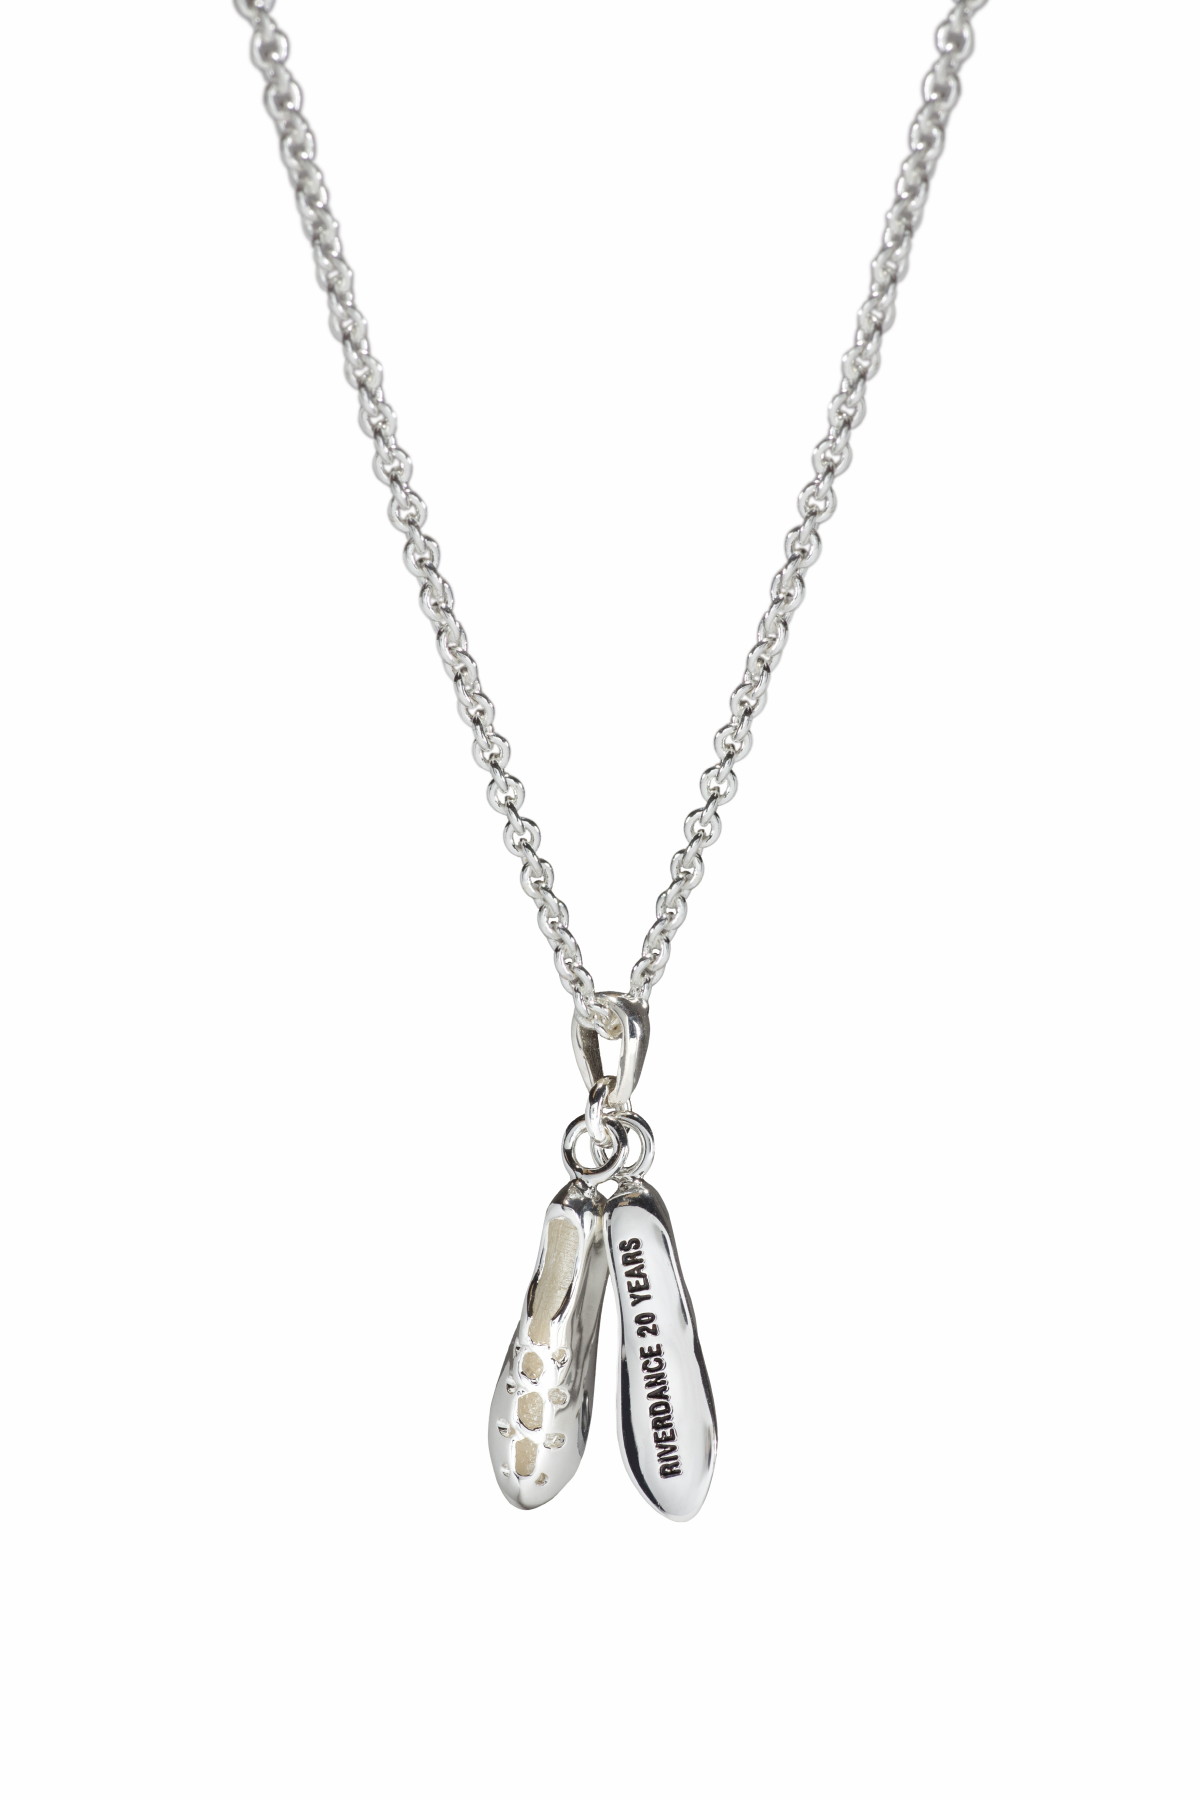 Riverdance 20 Fine Chain Necklace with Light Dancing Shoes